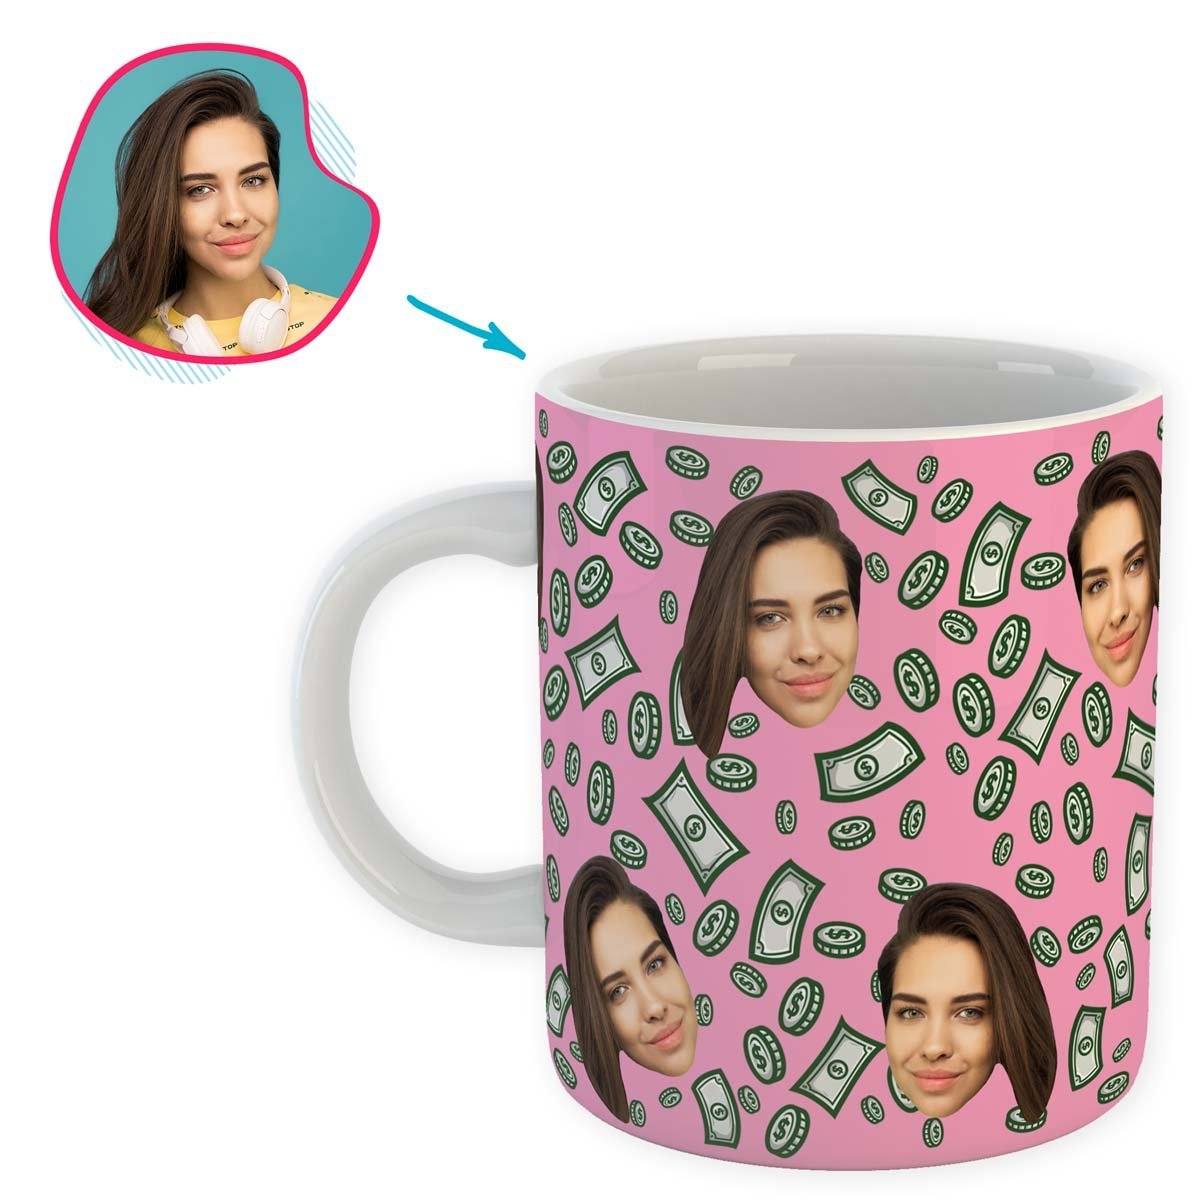 pink Money mug personalized with photo of face printed on it